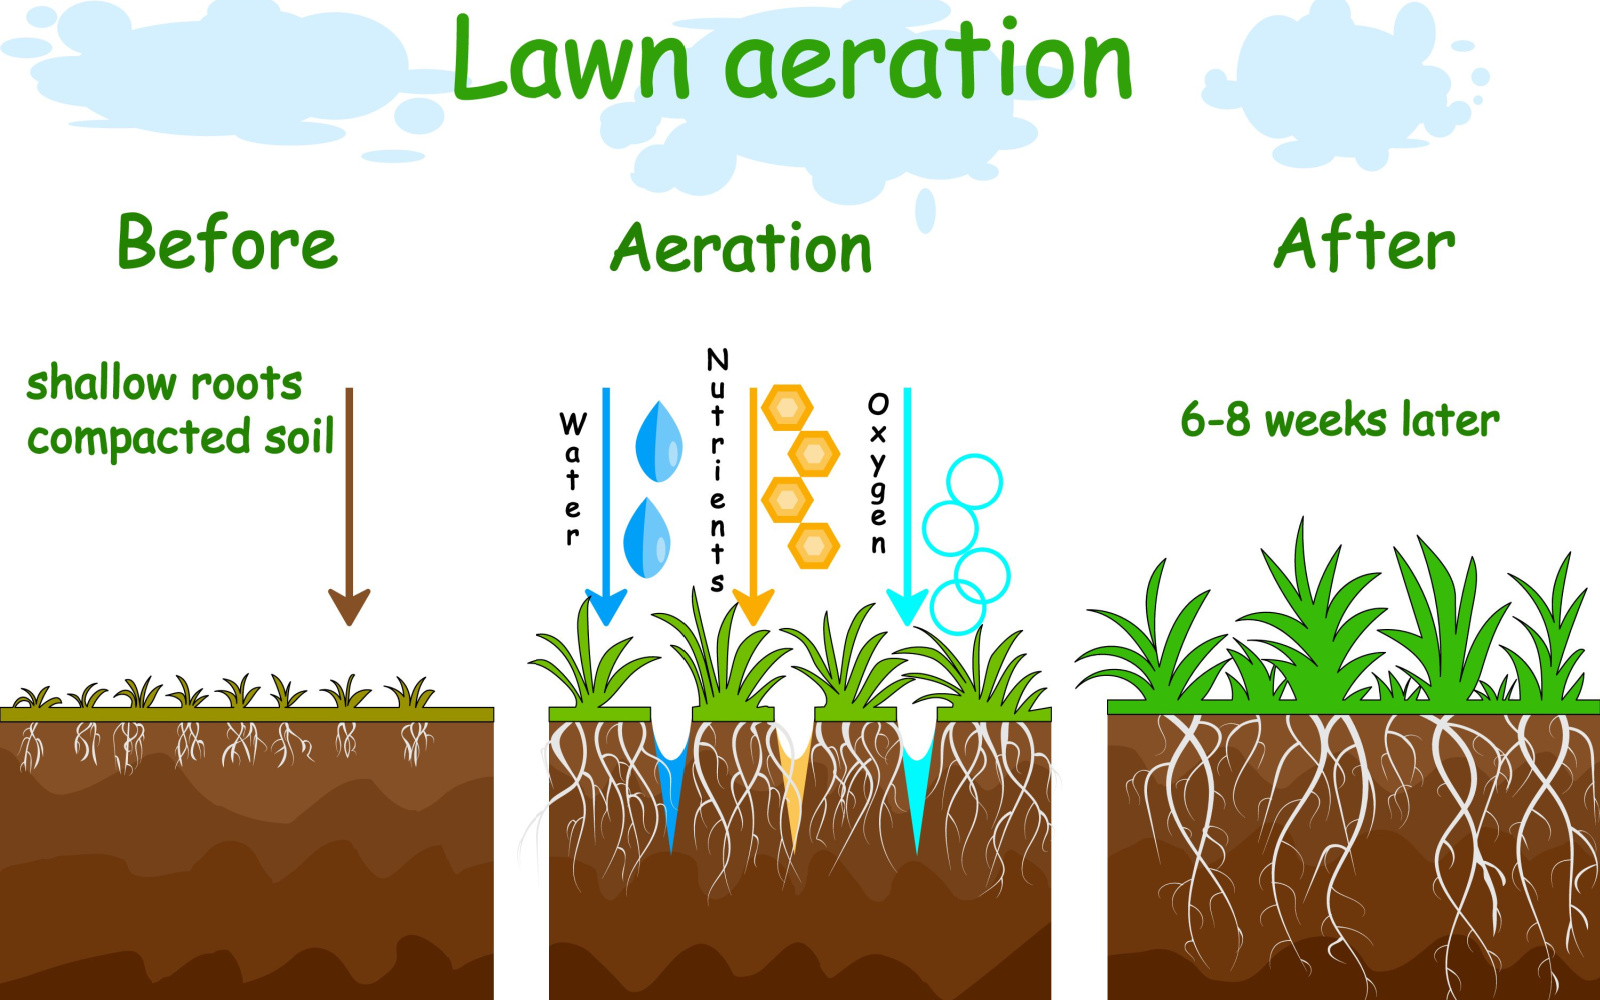 Lawn Aeration Near Me Webster Groves, MO | Webster Groves, MO Lawn Care Services | Lawn Sprinklers of St. Louis